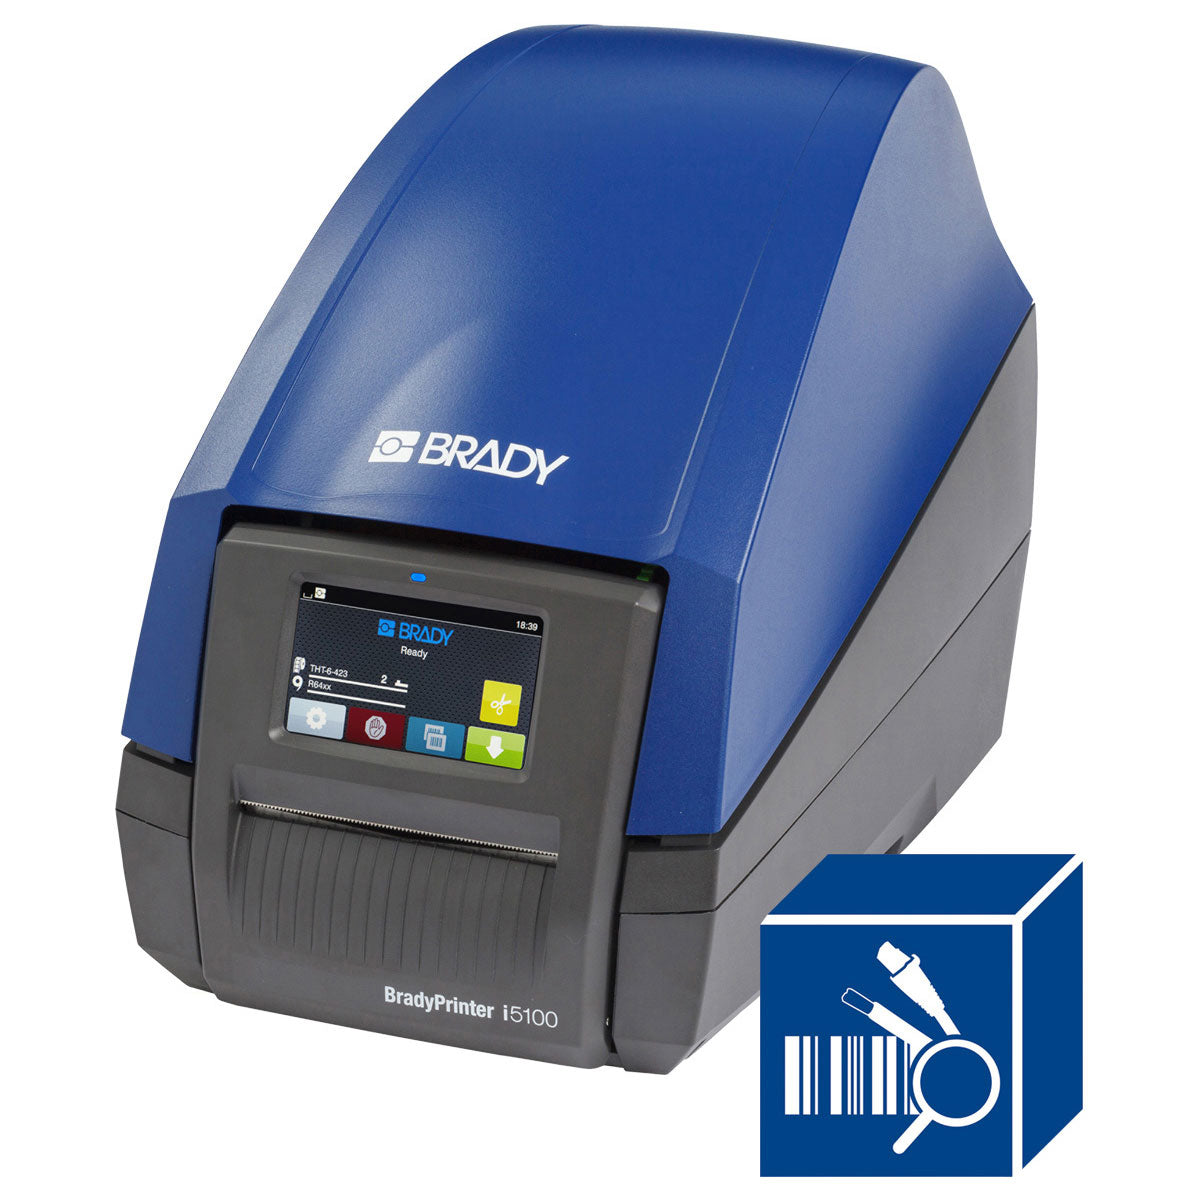 BradyPrinter i5100 600dpi Industrial Label Printer Autocut Model with Product and Wire ID Software Suite